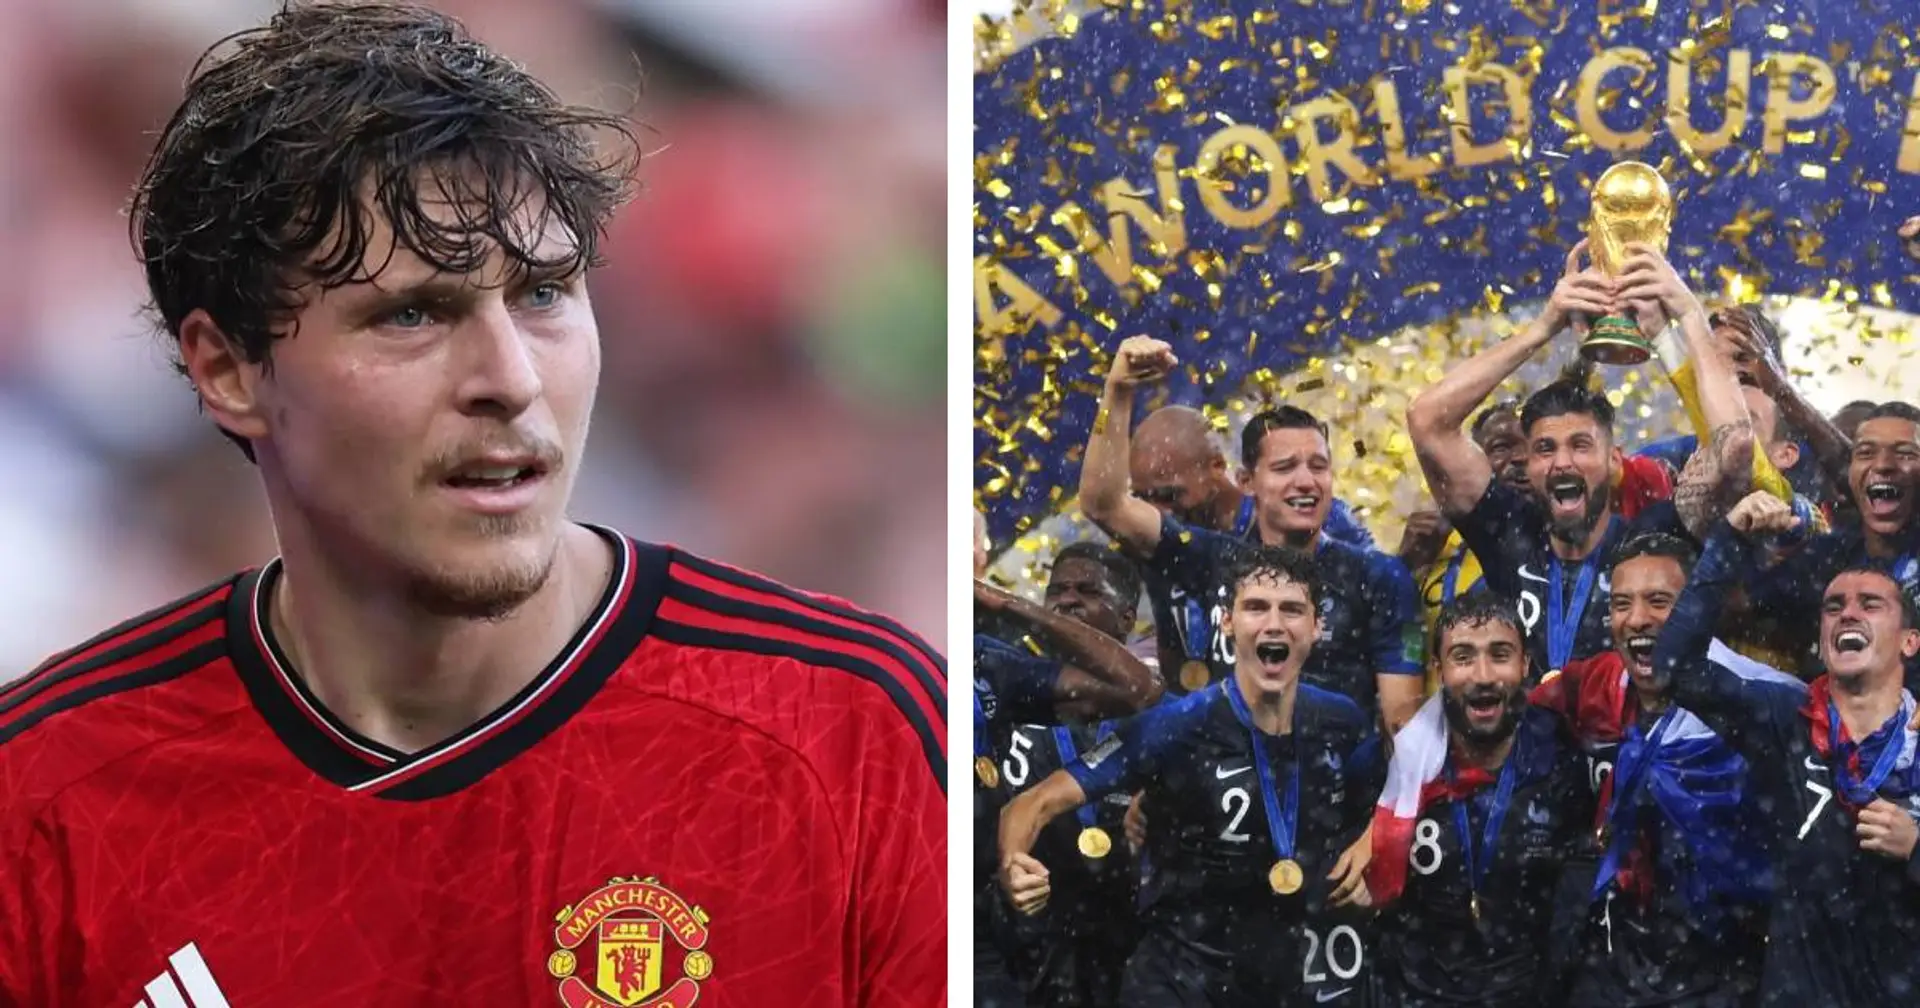 Bizarre report claims Man United may swap Victor Lindelof to sign World Cup winner